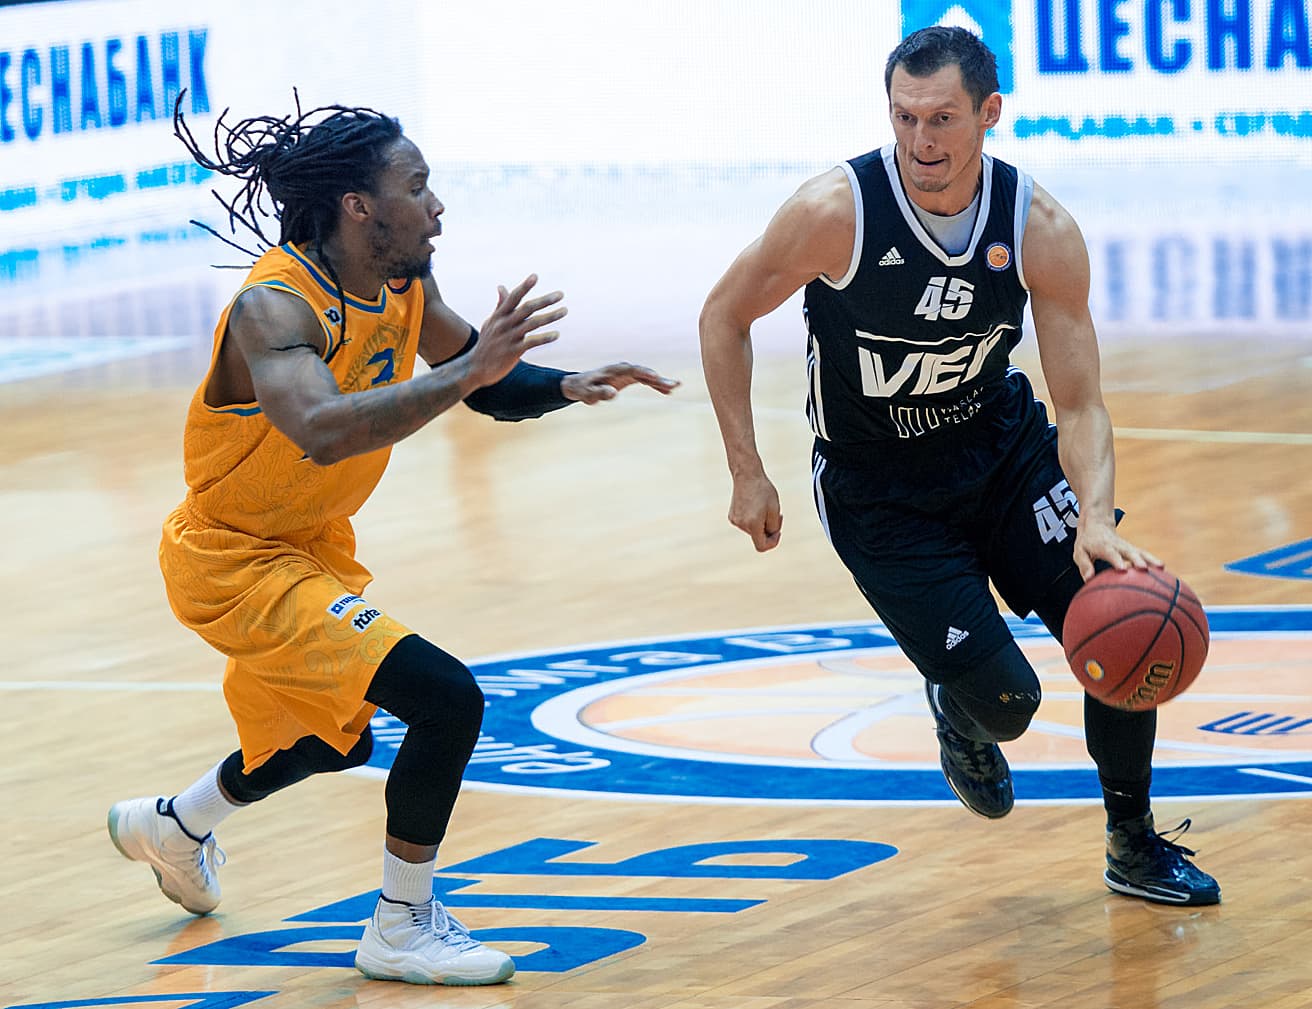 Rocking The Boat: VEF And Astana Breaking Stereotypes